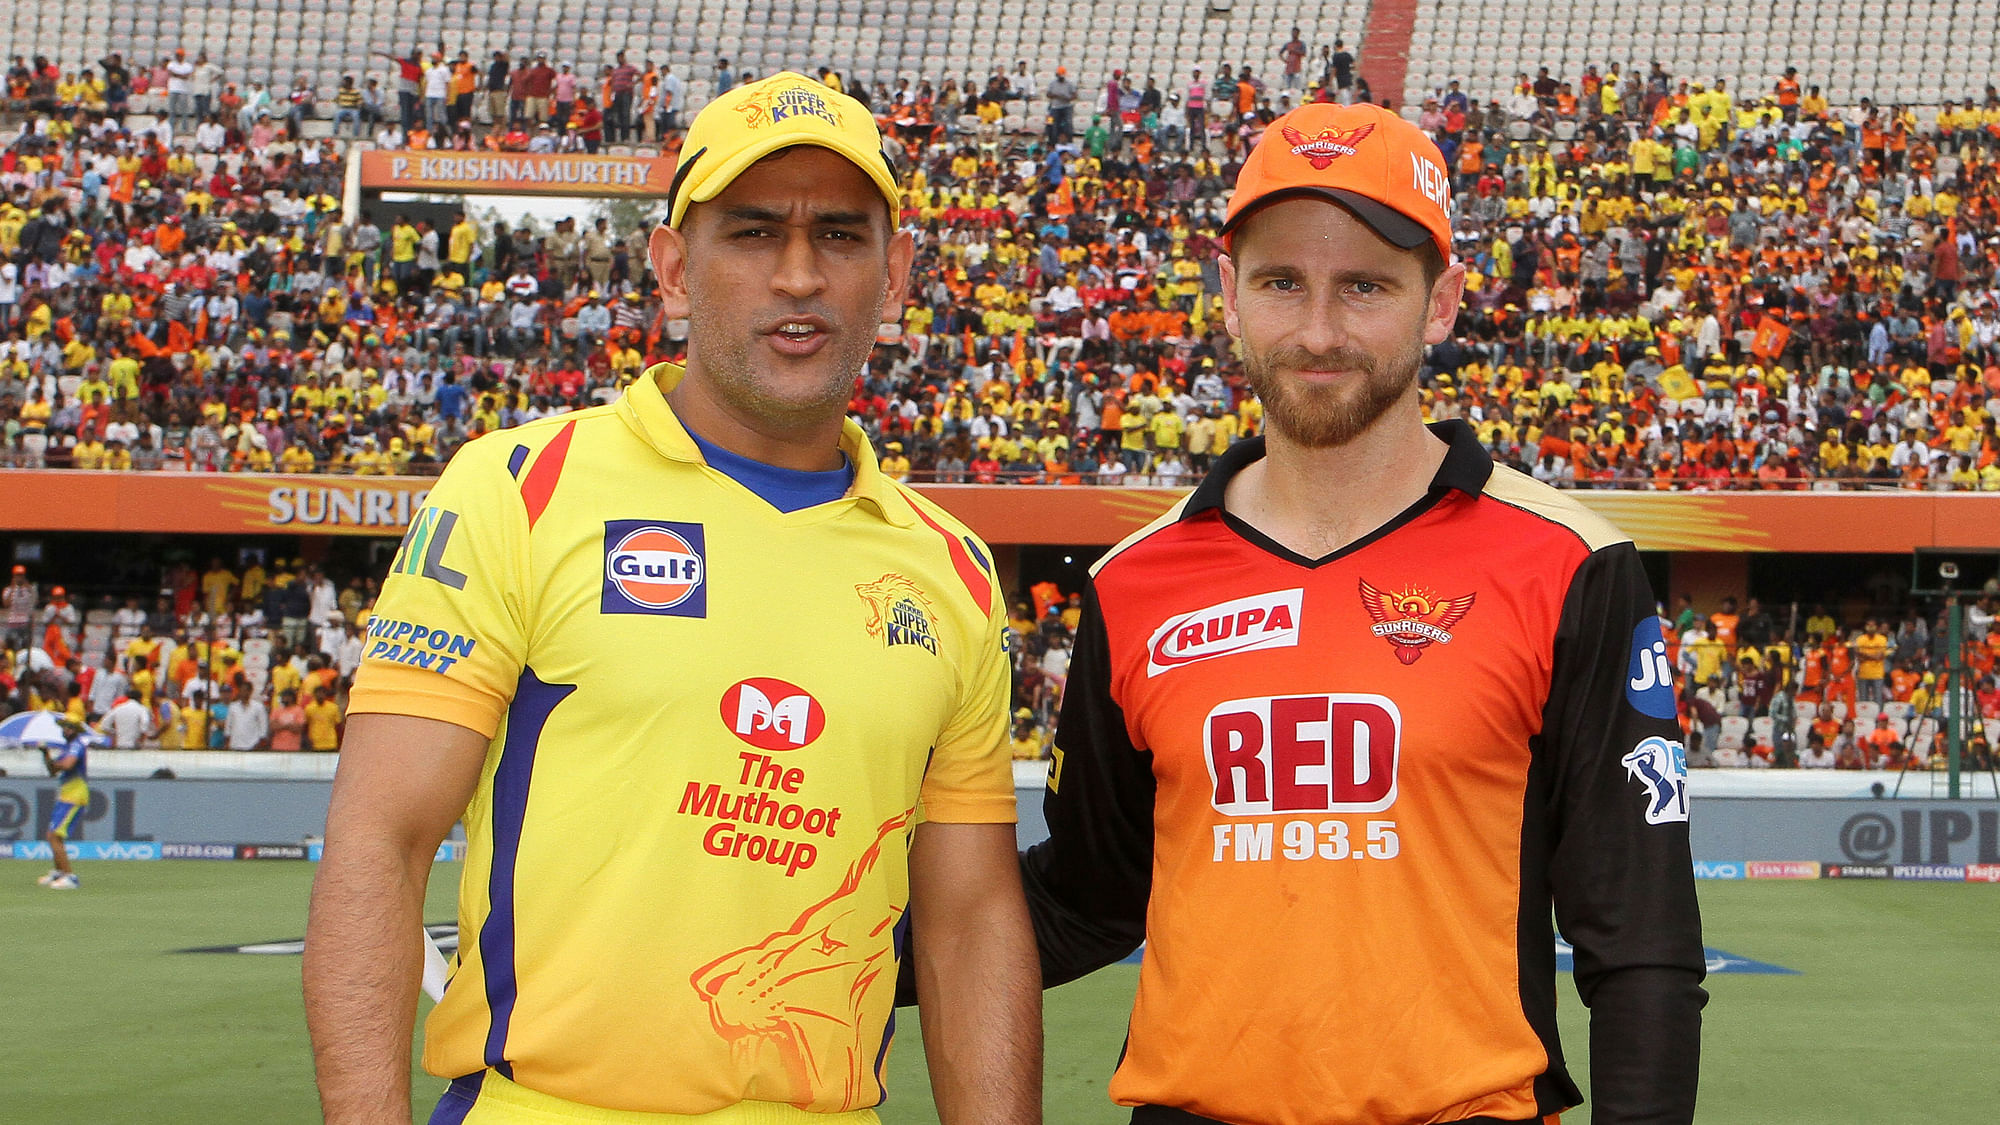 Table-toppers Sunrisers Hyderabad take on Chennai Super Kings in the Qualifier 1.